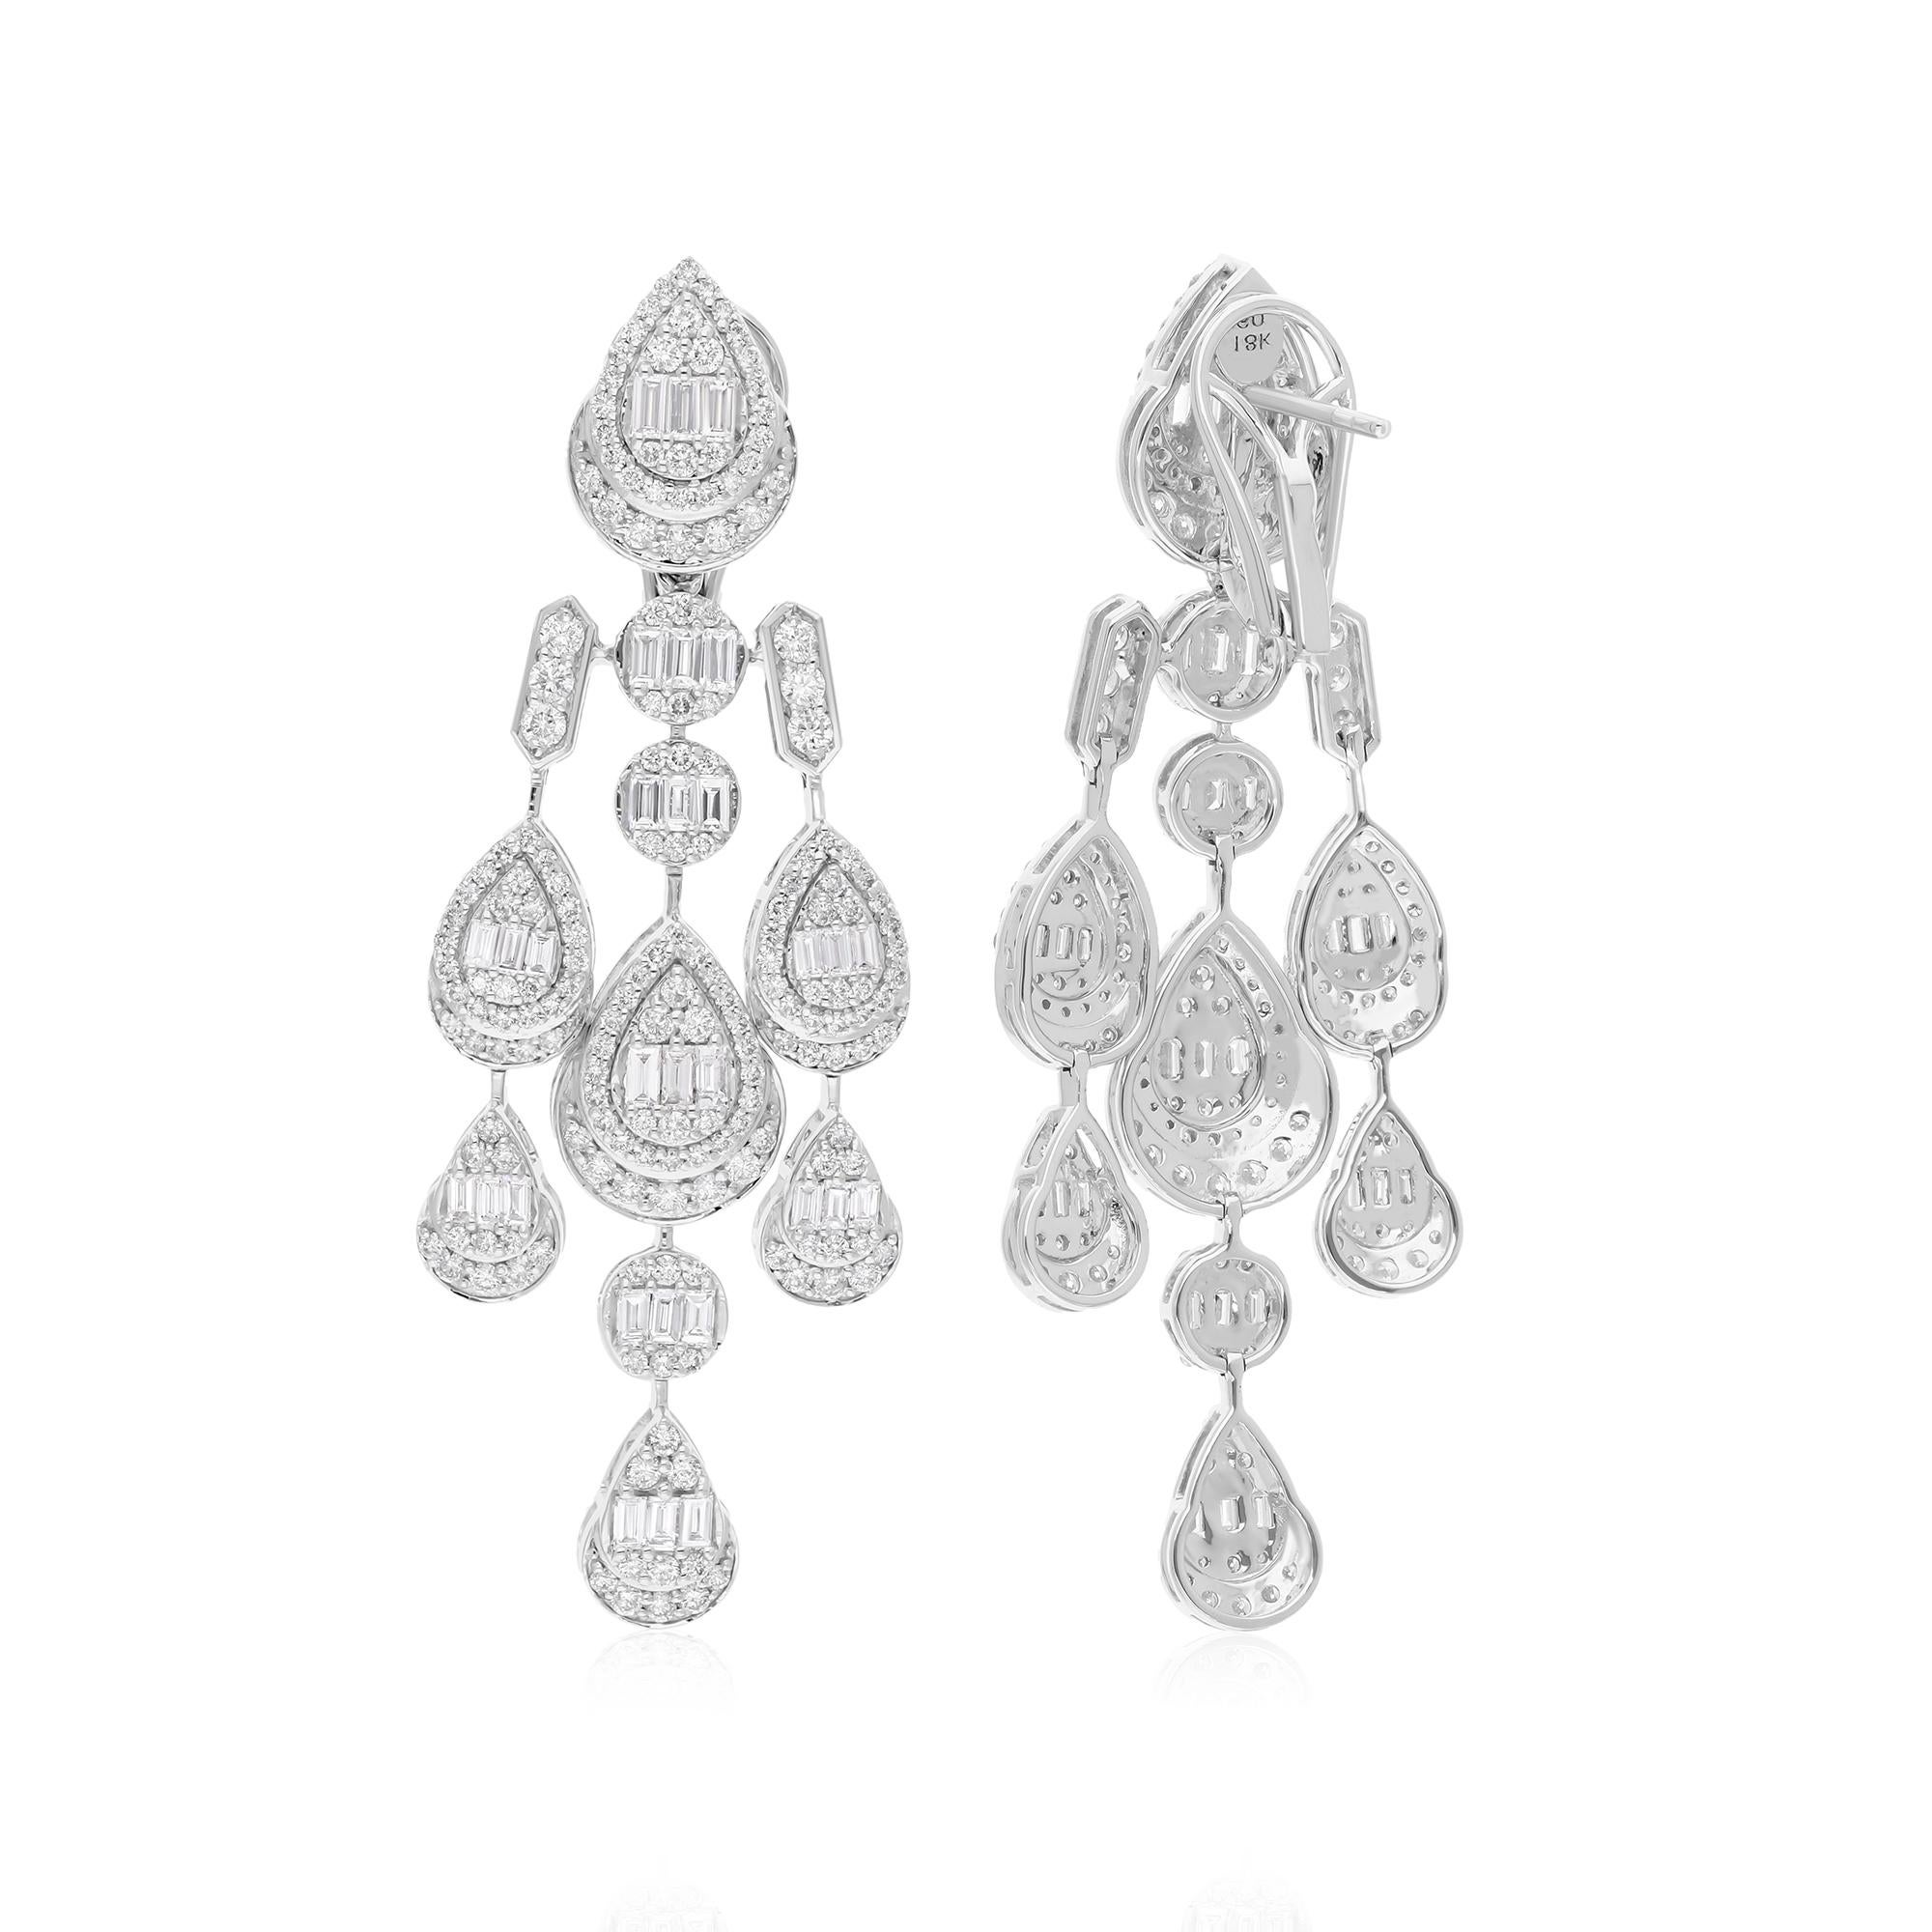 Item Code :- SEE-15553A (14k)
Gross Wt. :- 14.03 gm
14k Solid White Gold Wt. :- 13.16 gm
Natural Diamond Wt. :- 4.35 Ct. ( AVERAGE DIAMOND CLARITY SI1-SI2 & COLOR H-I )
Earrings Size :- 55 mm approx.

✦ Sizing
.....................
We can adjust